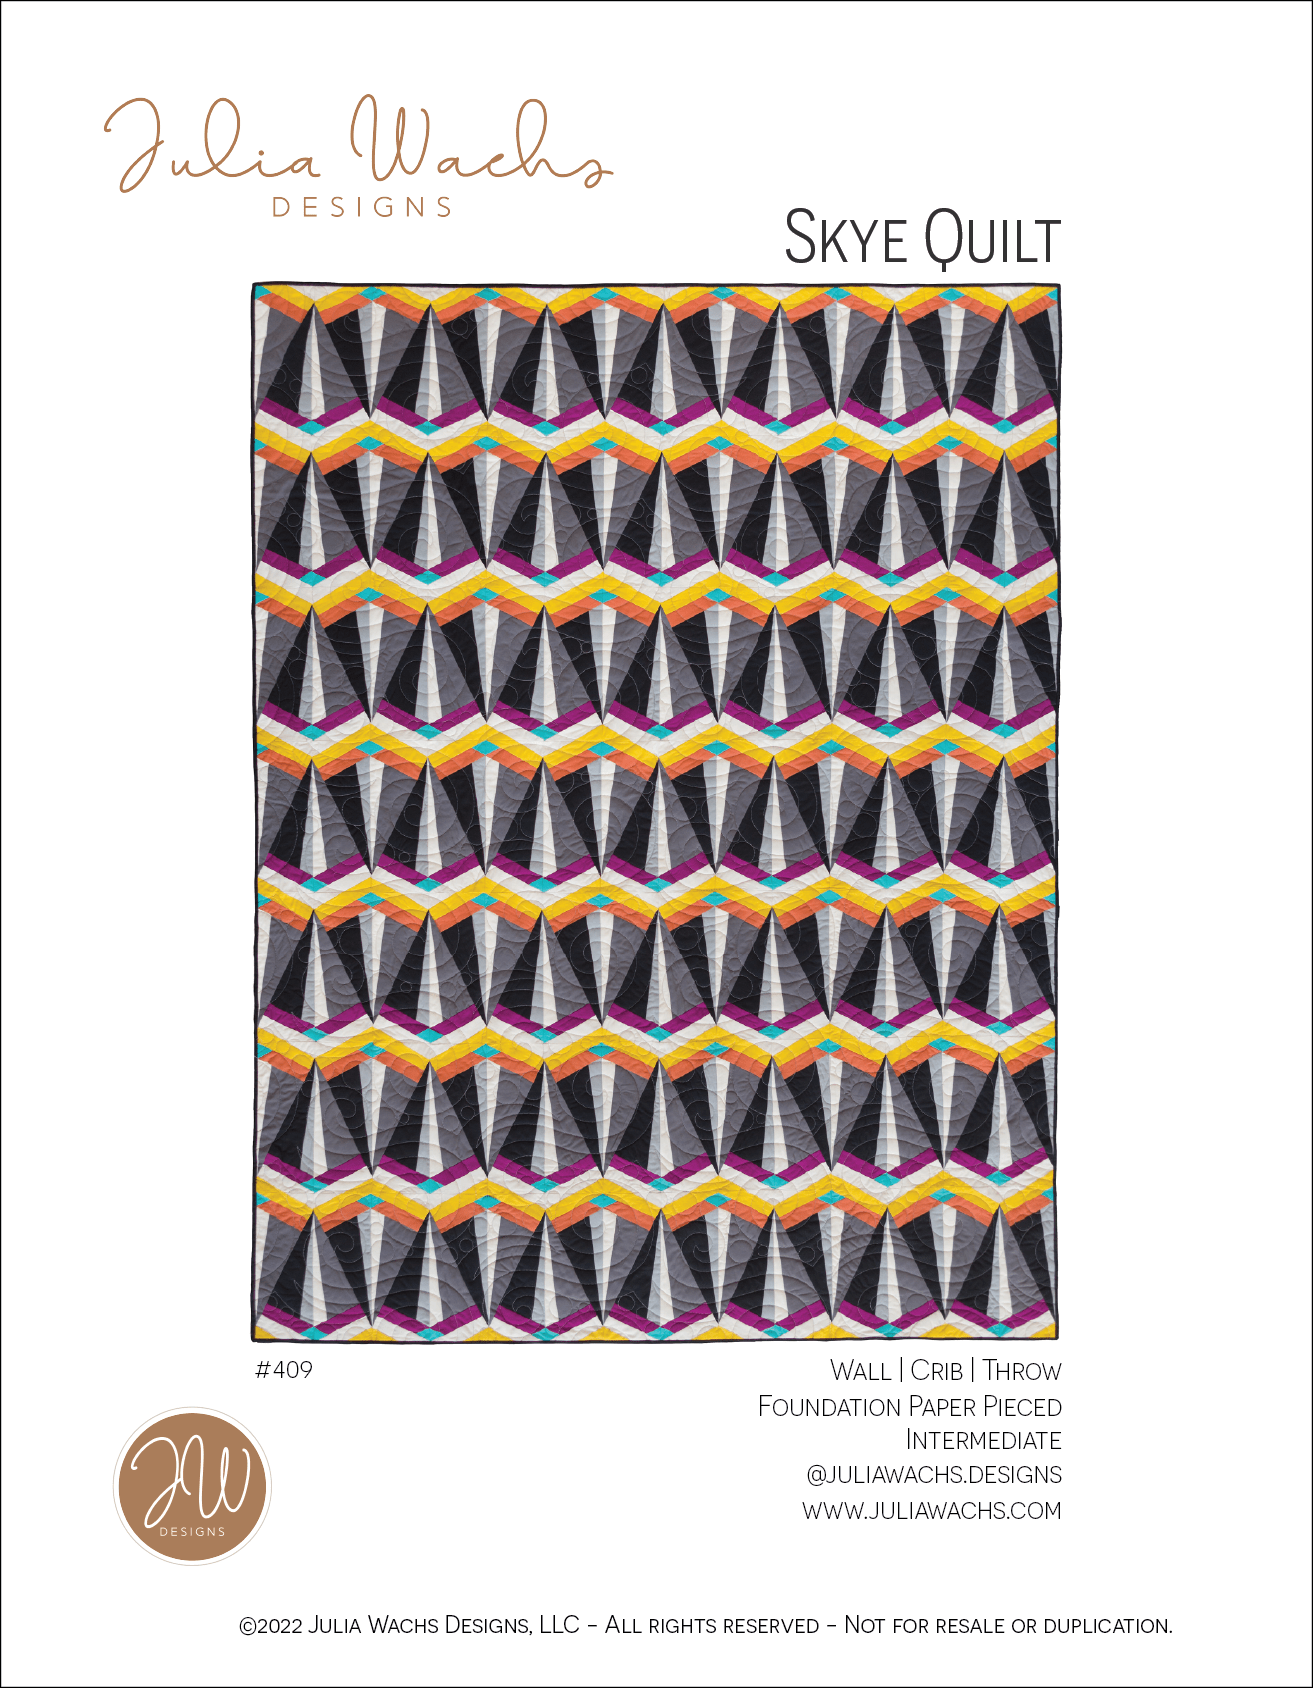 Skye Quilt Pattern - Julia Wachs Designs - The pattern cover of the Skye quilt.